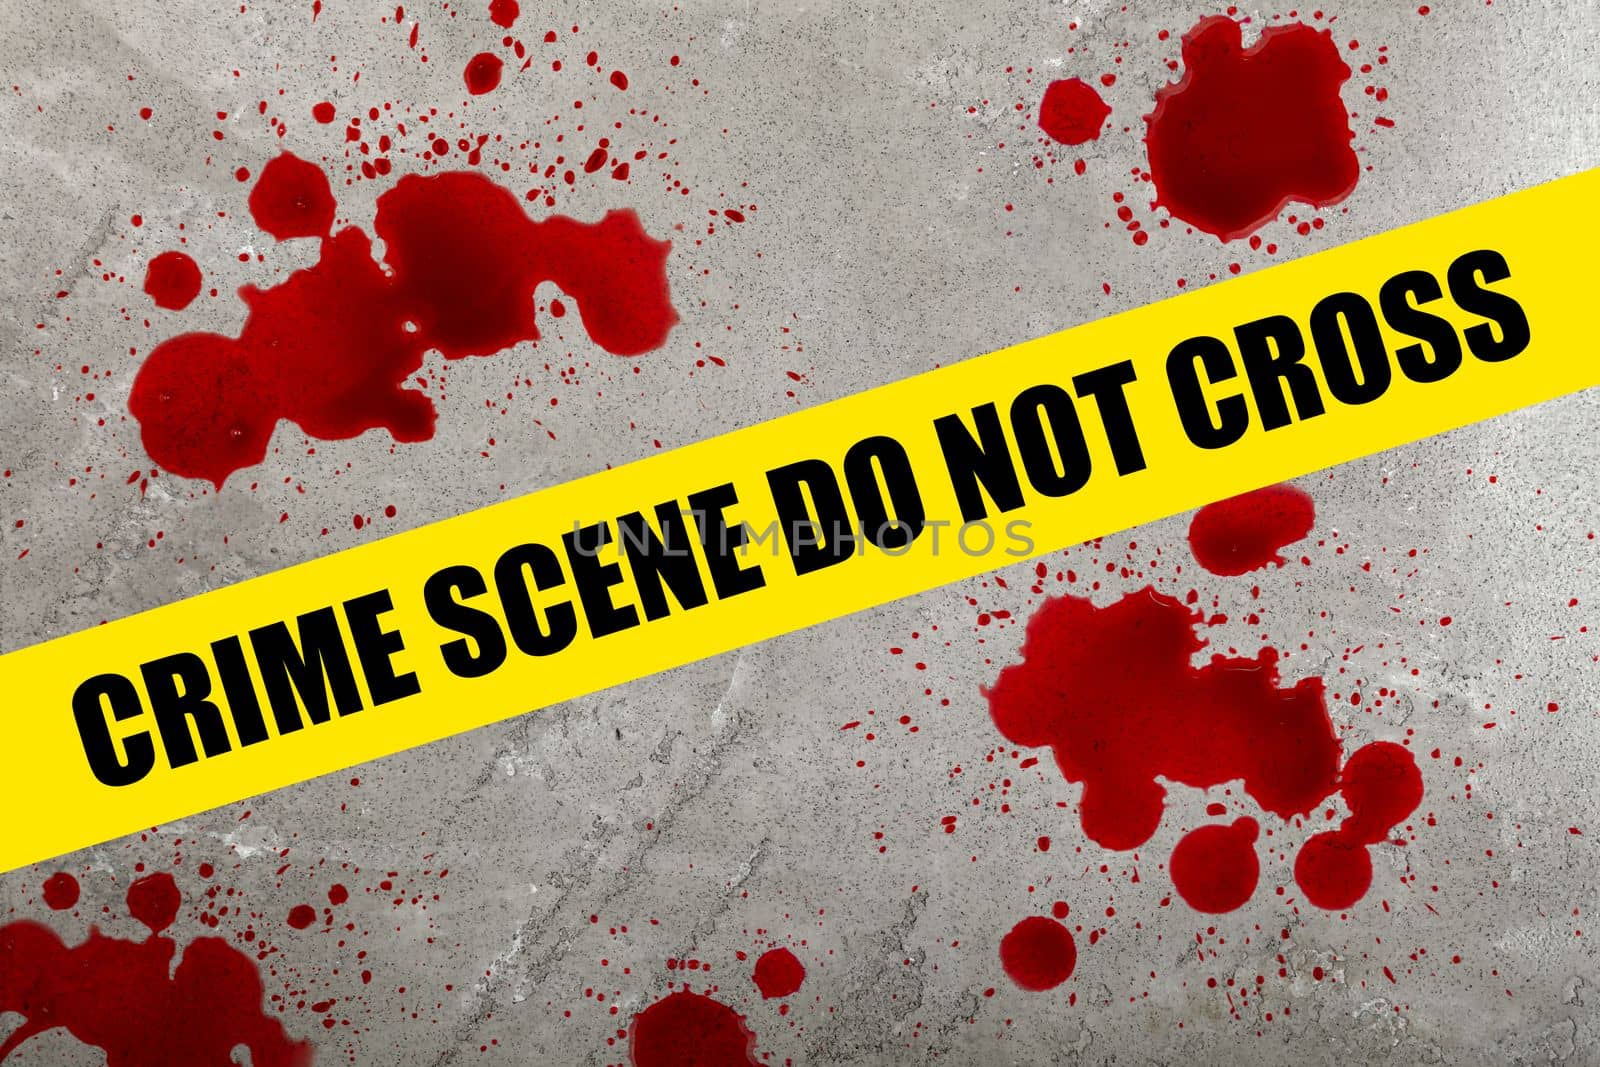 Close up yellow police barricade tape with crime scene do not cross words over blood stains splattered on grey stone floor background